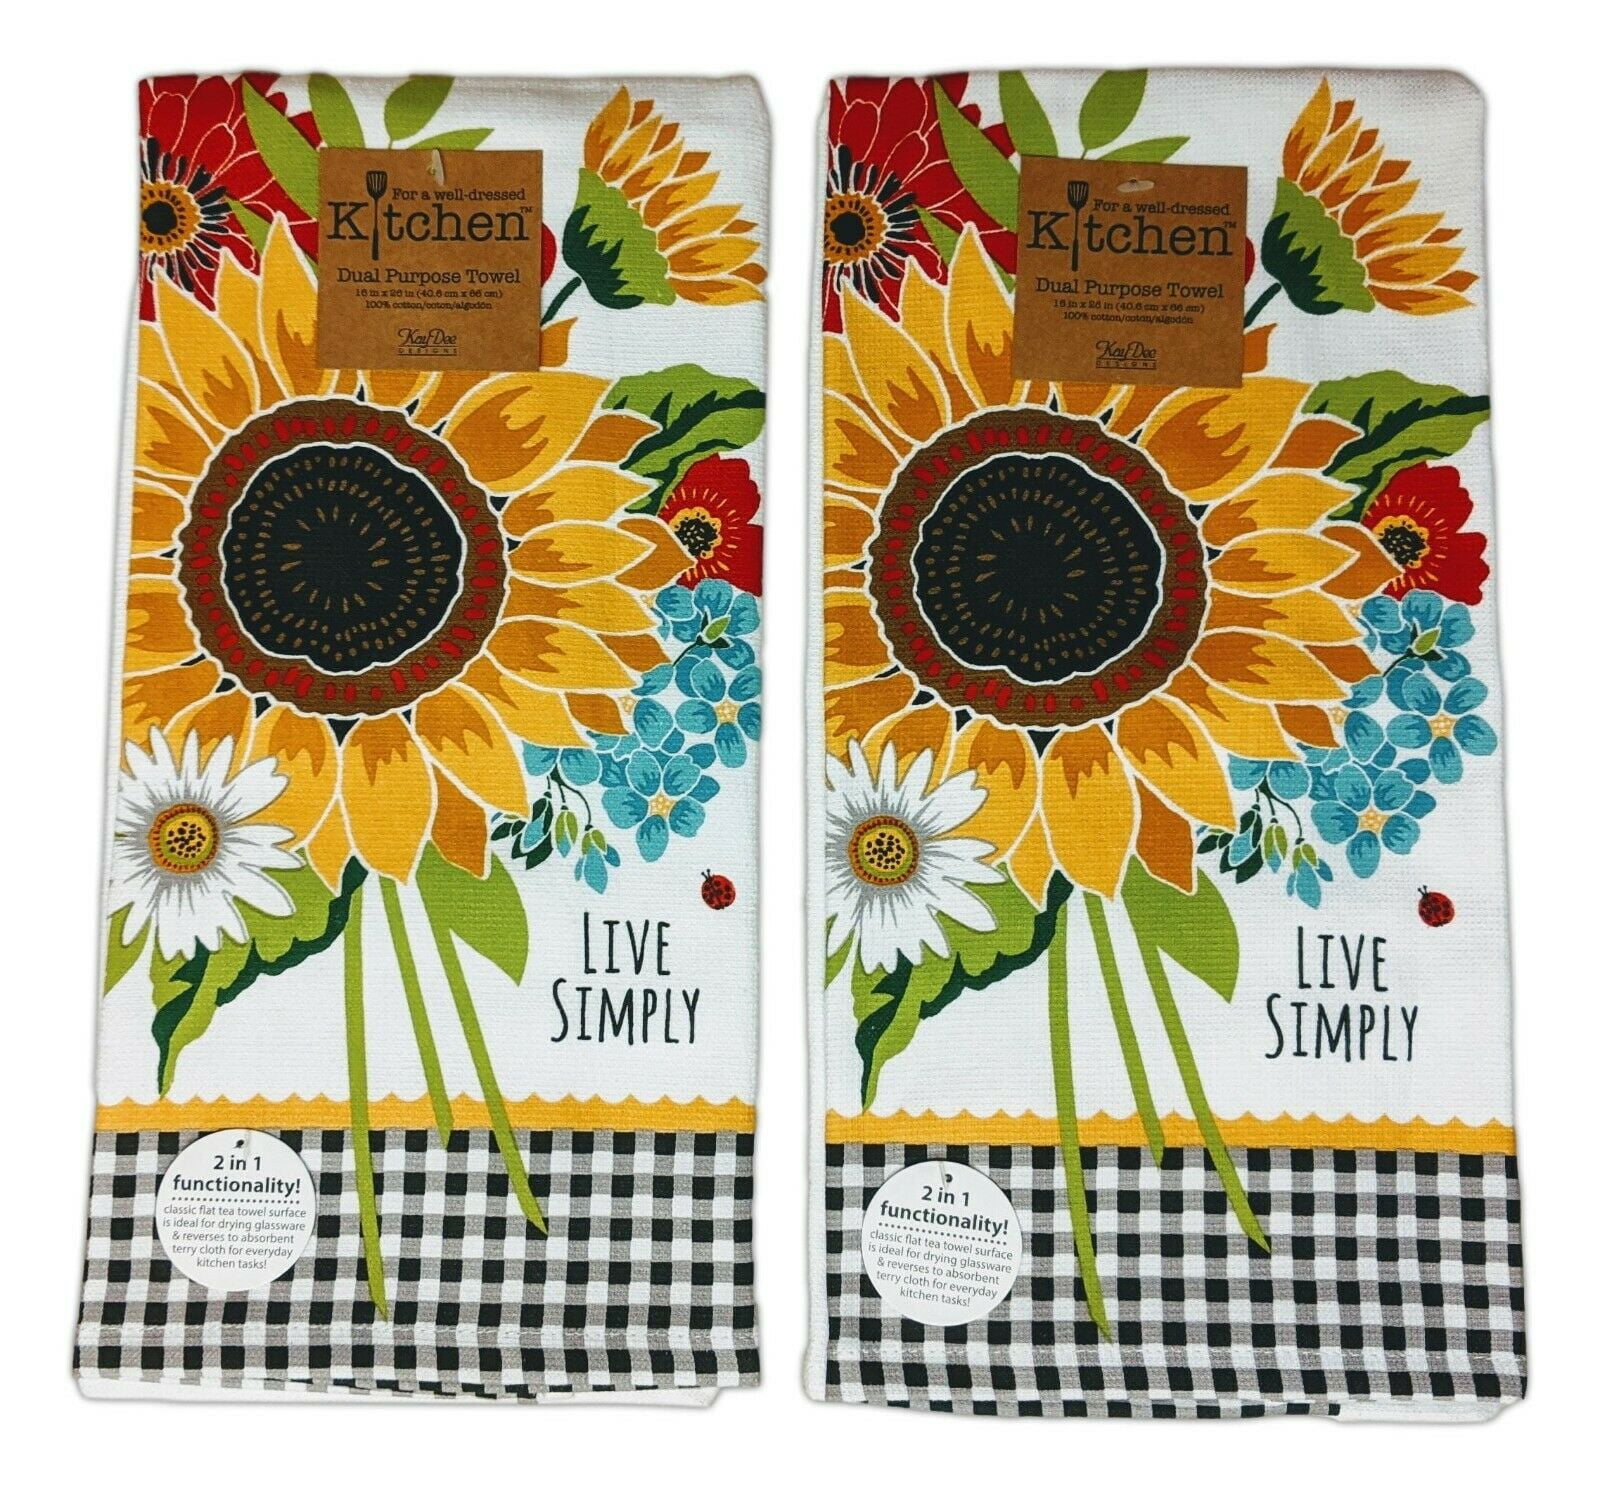 Live Simply Hand Towel Set 16"x28" 2 sets of 2 total of 4 towels 